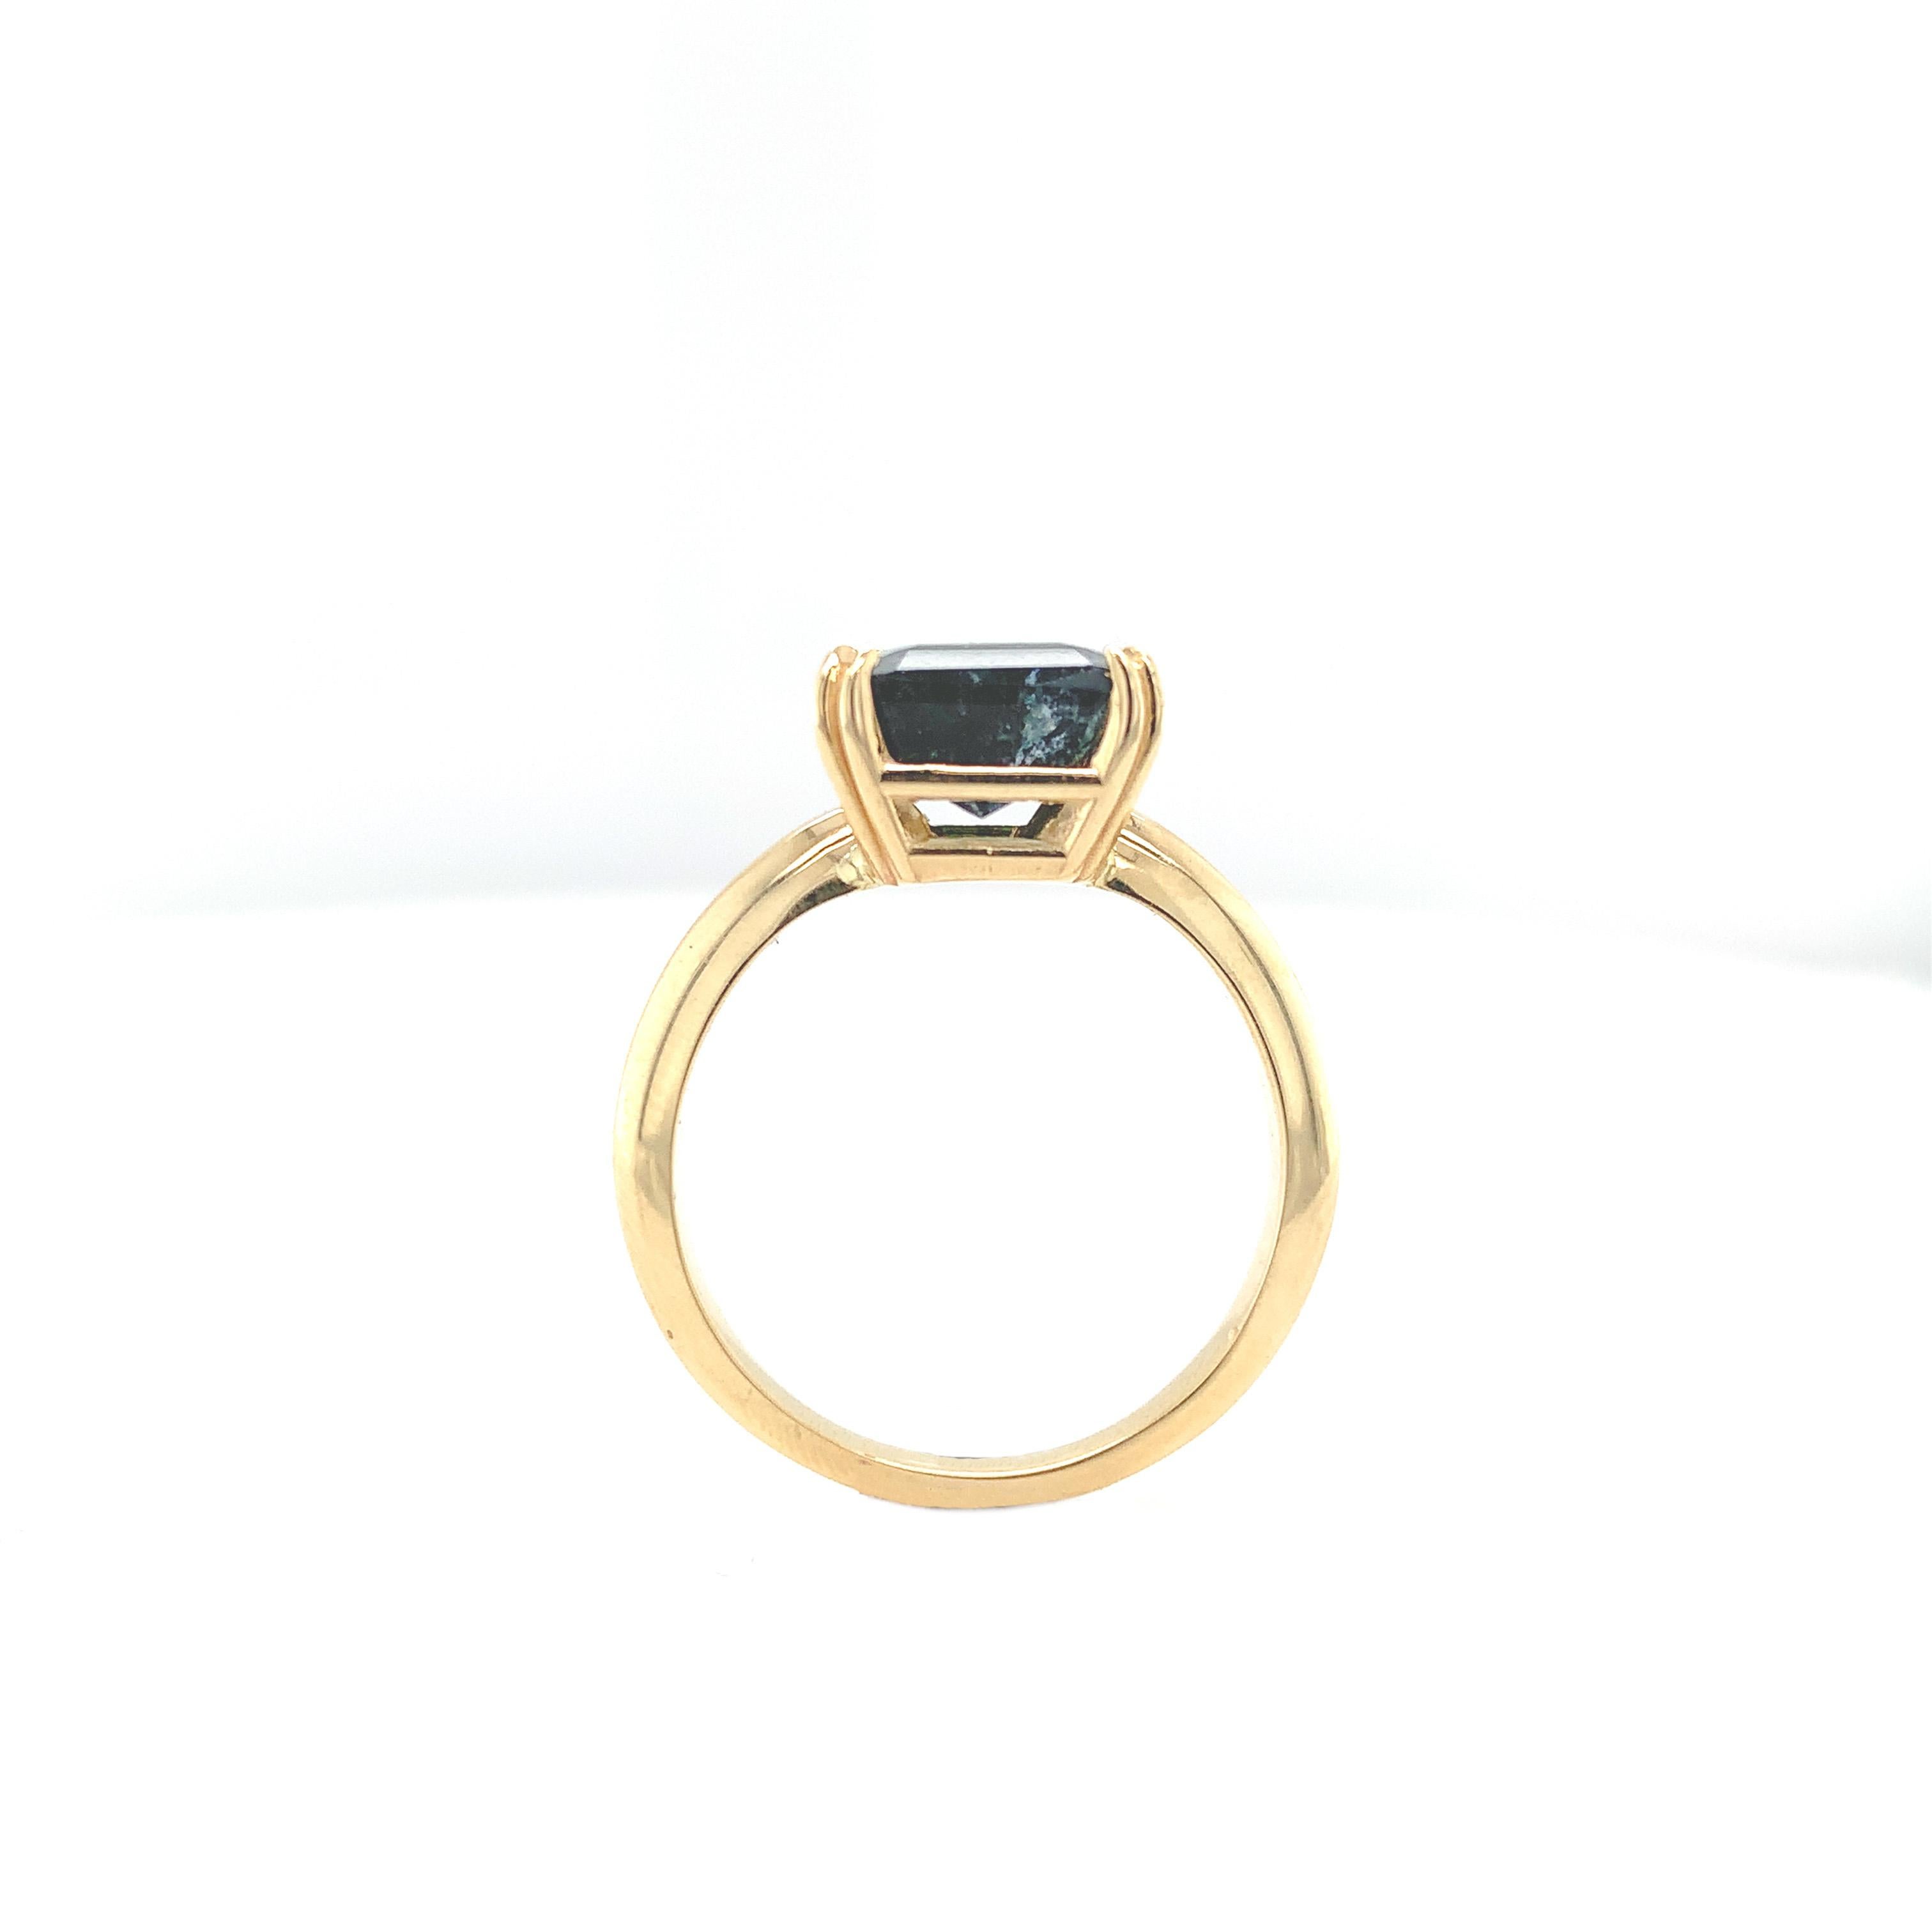 A 14K yellow gold ring featuring a bi-color tourmaline weighing 3.13 carats. The tourmaline has color from clear to green to very dark green, almost black. The tourmaline is an almost square step cut and measures about 8.5mm x 8mm. The tourmaline is